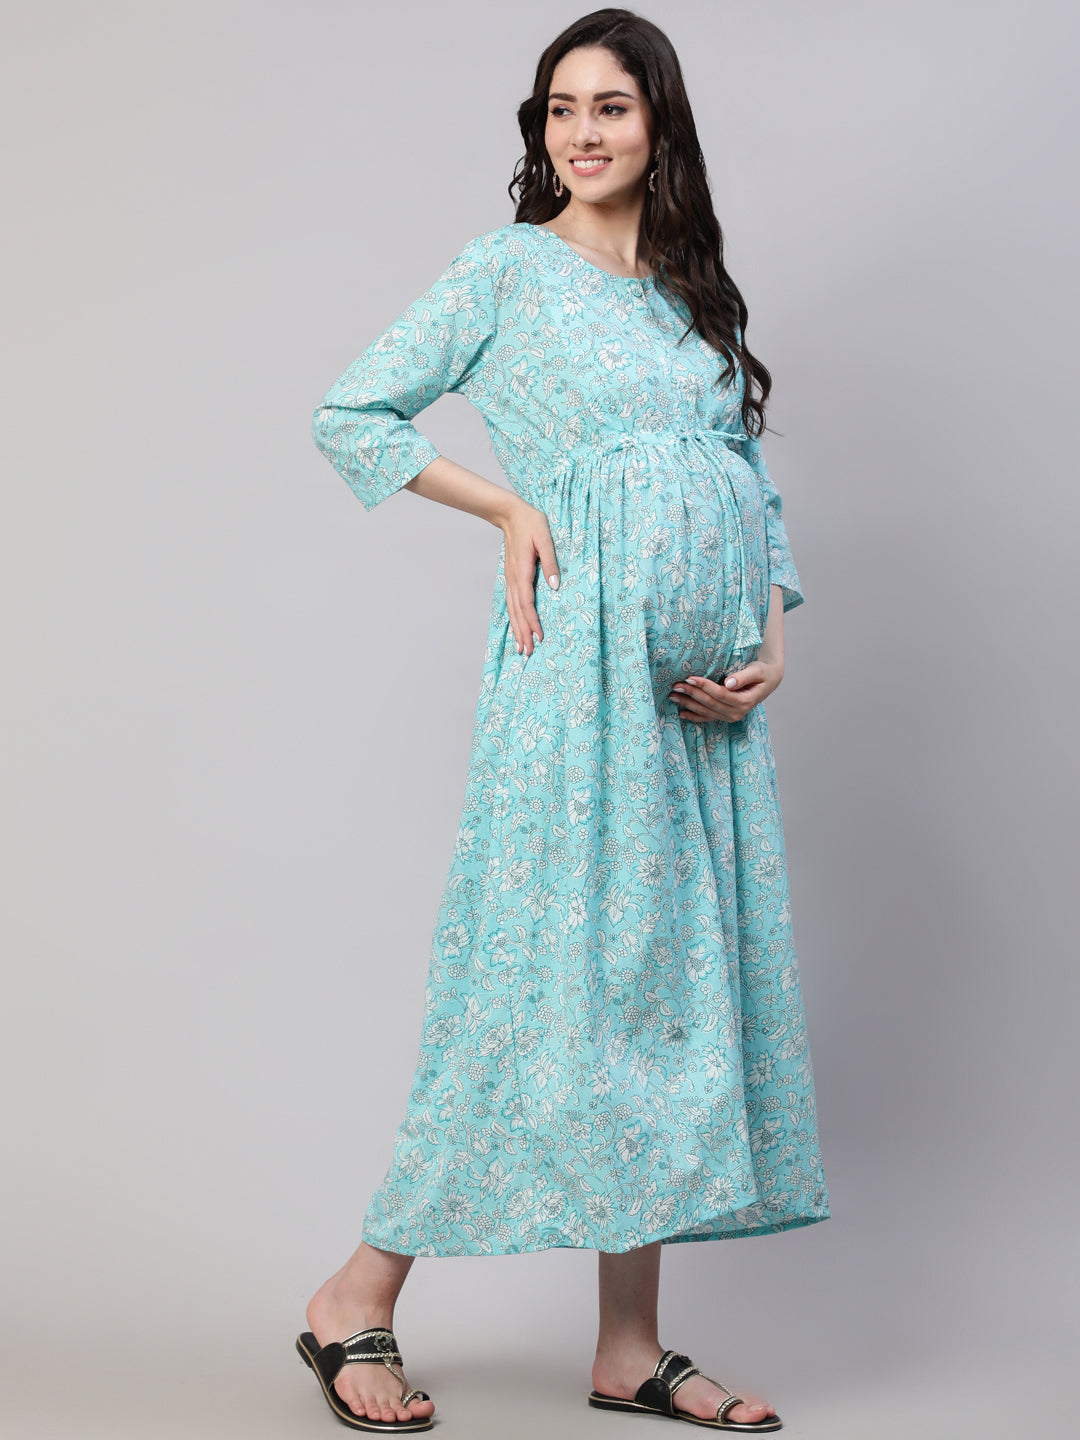 Women's Blue Floral Printed Flared Maternity Dress with Dupatta - Nayo Clothing